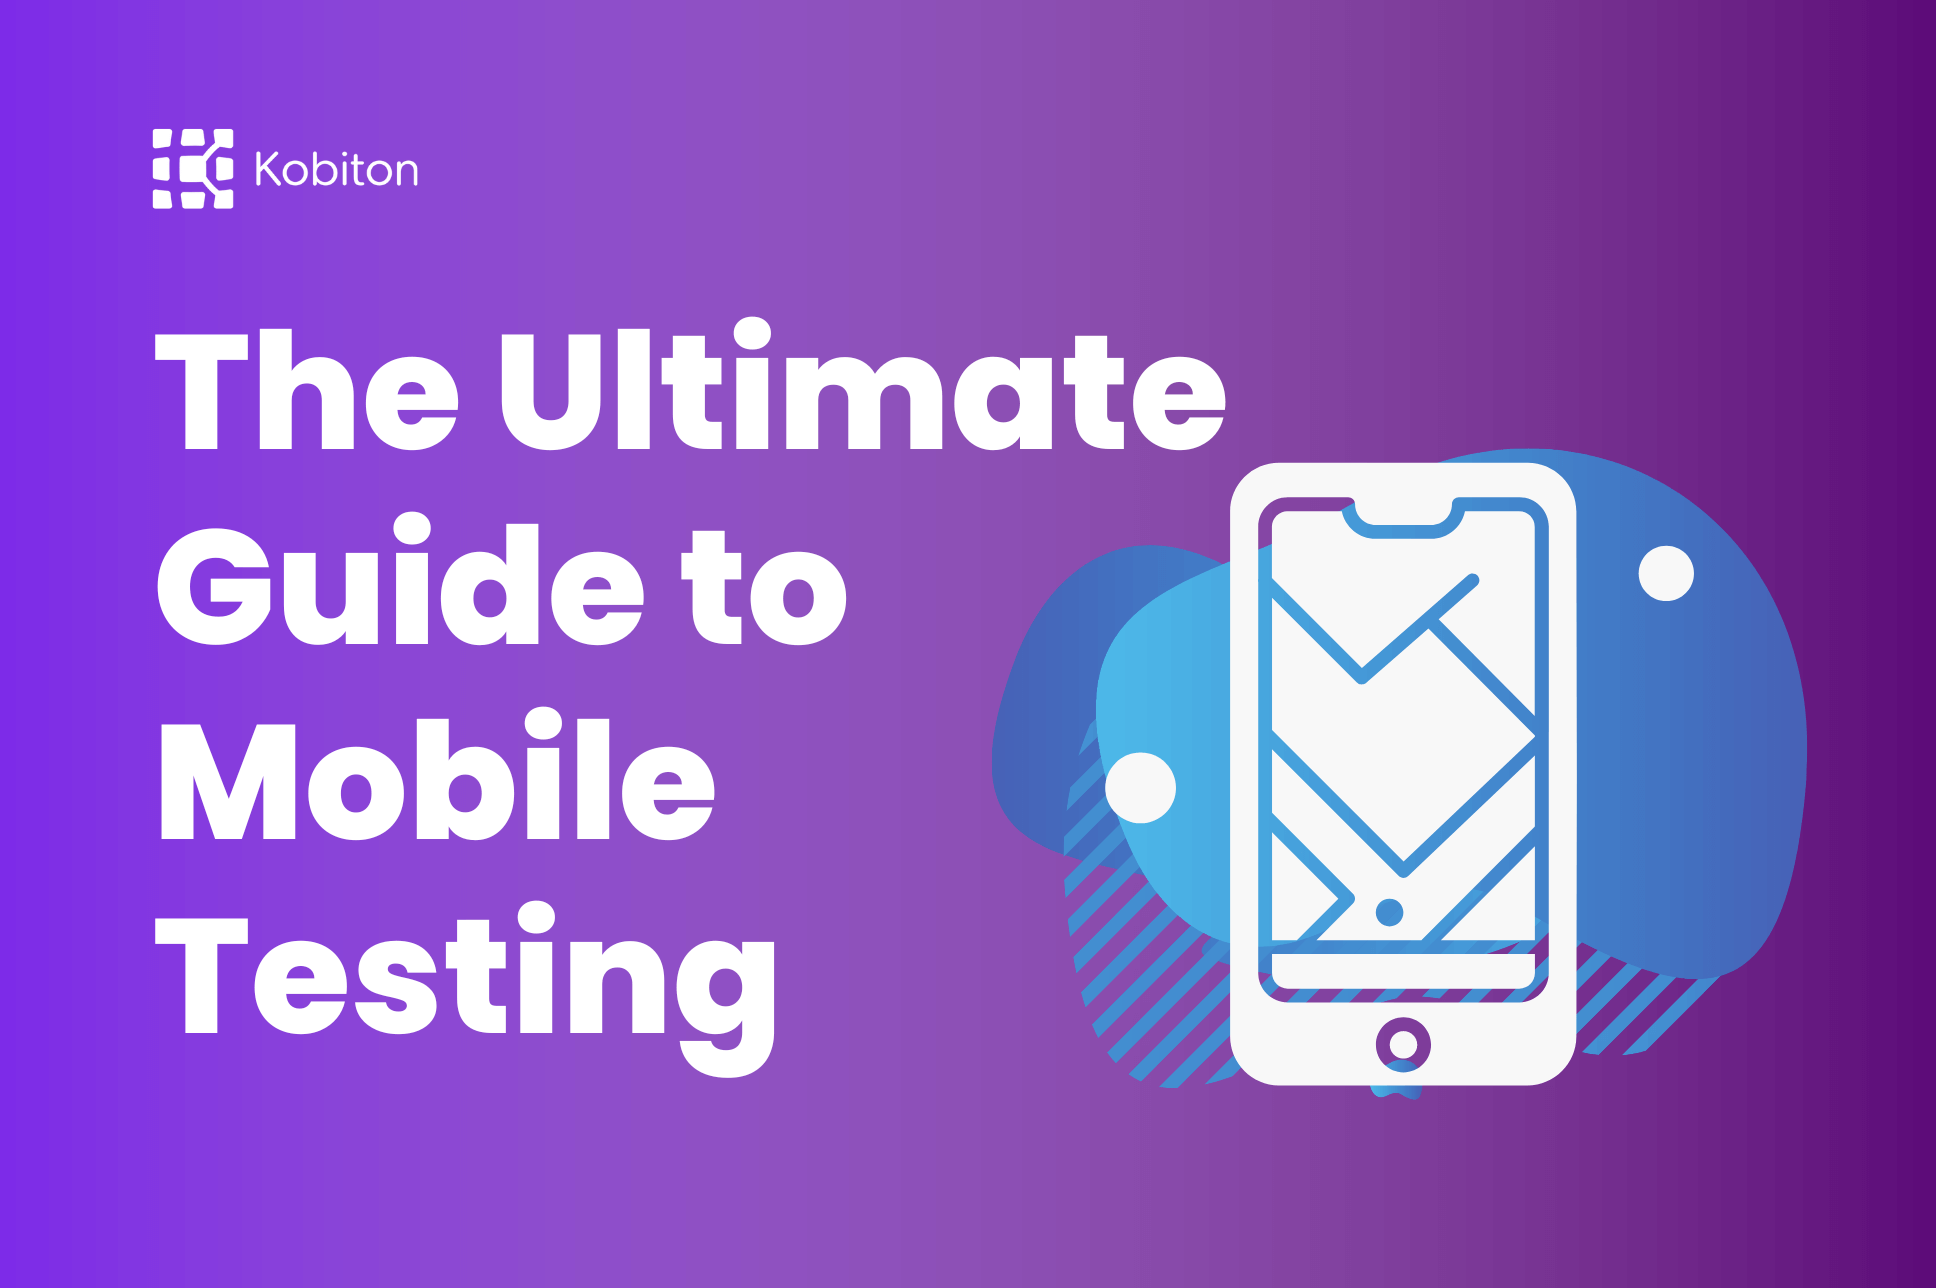 The Ultimate Guide to Mobile Testing